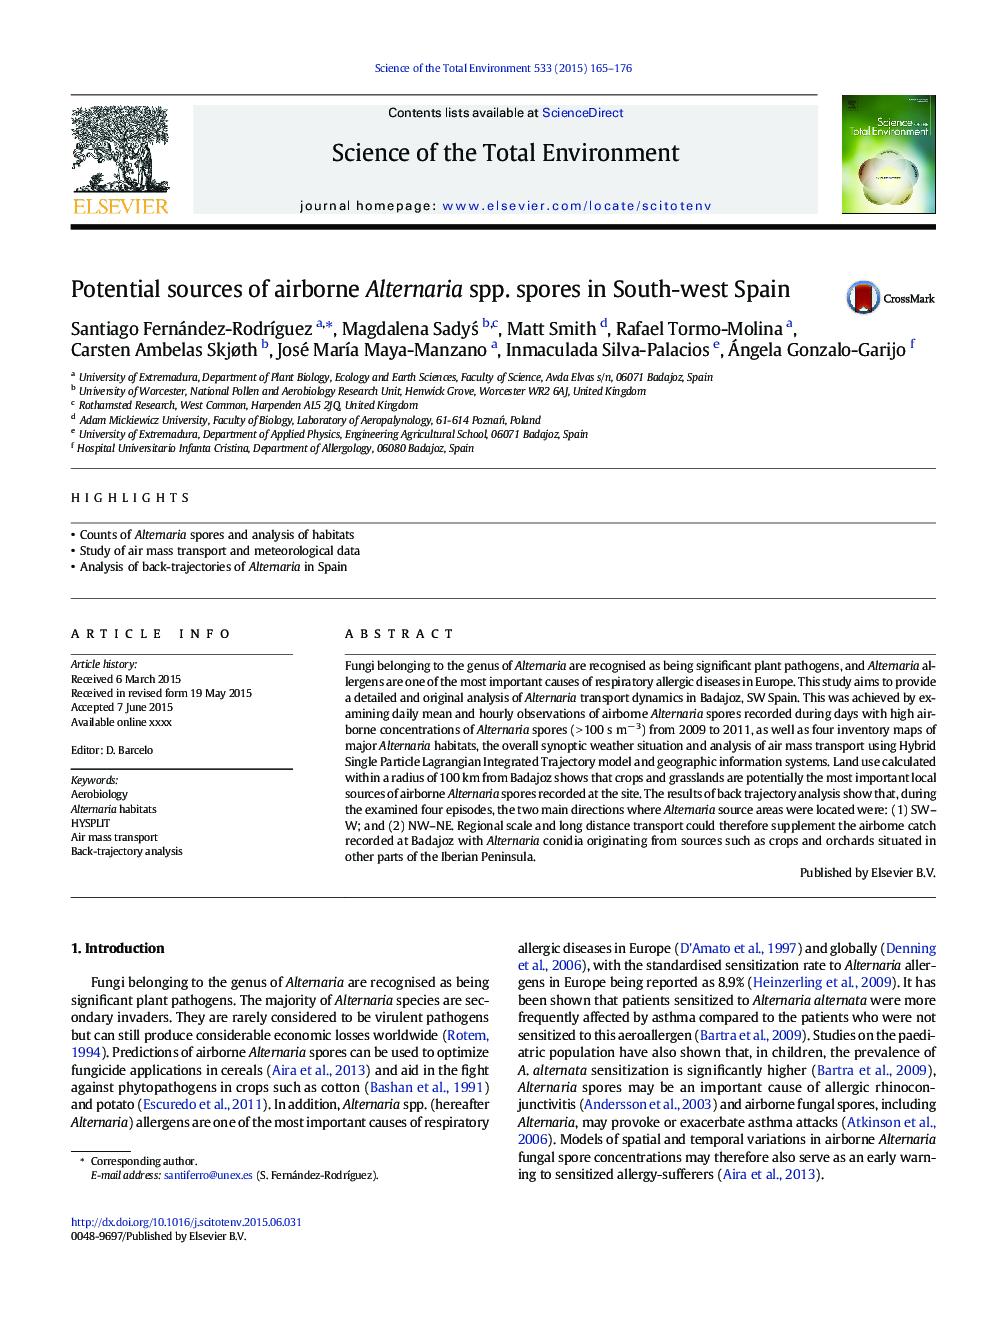 Potential sources of airborne Alternaria spp. spores in South-west Spain